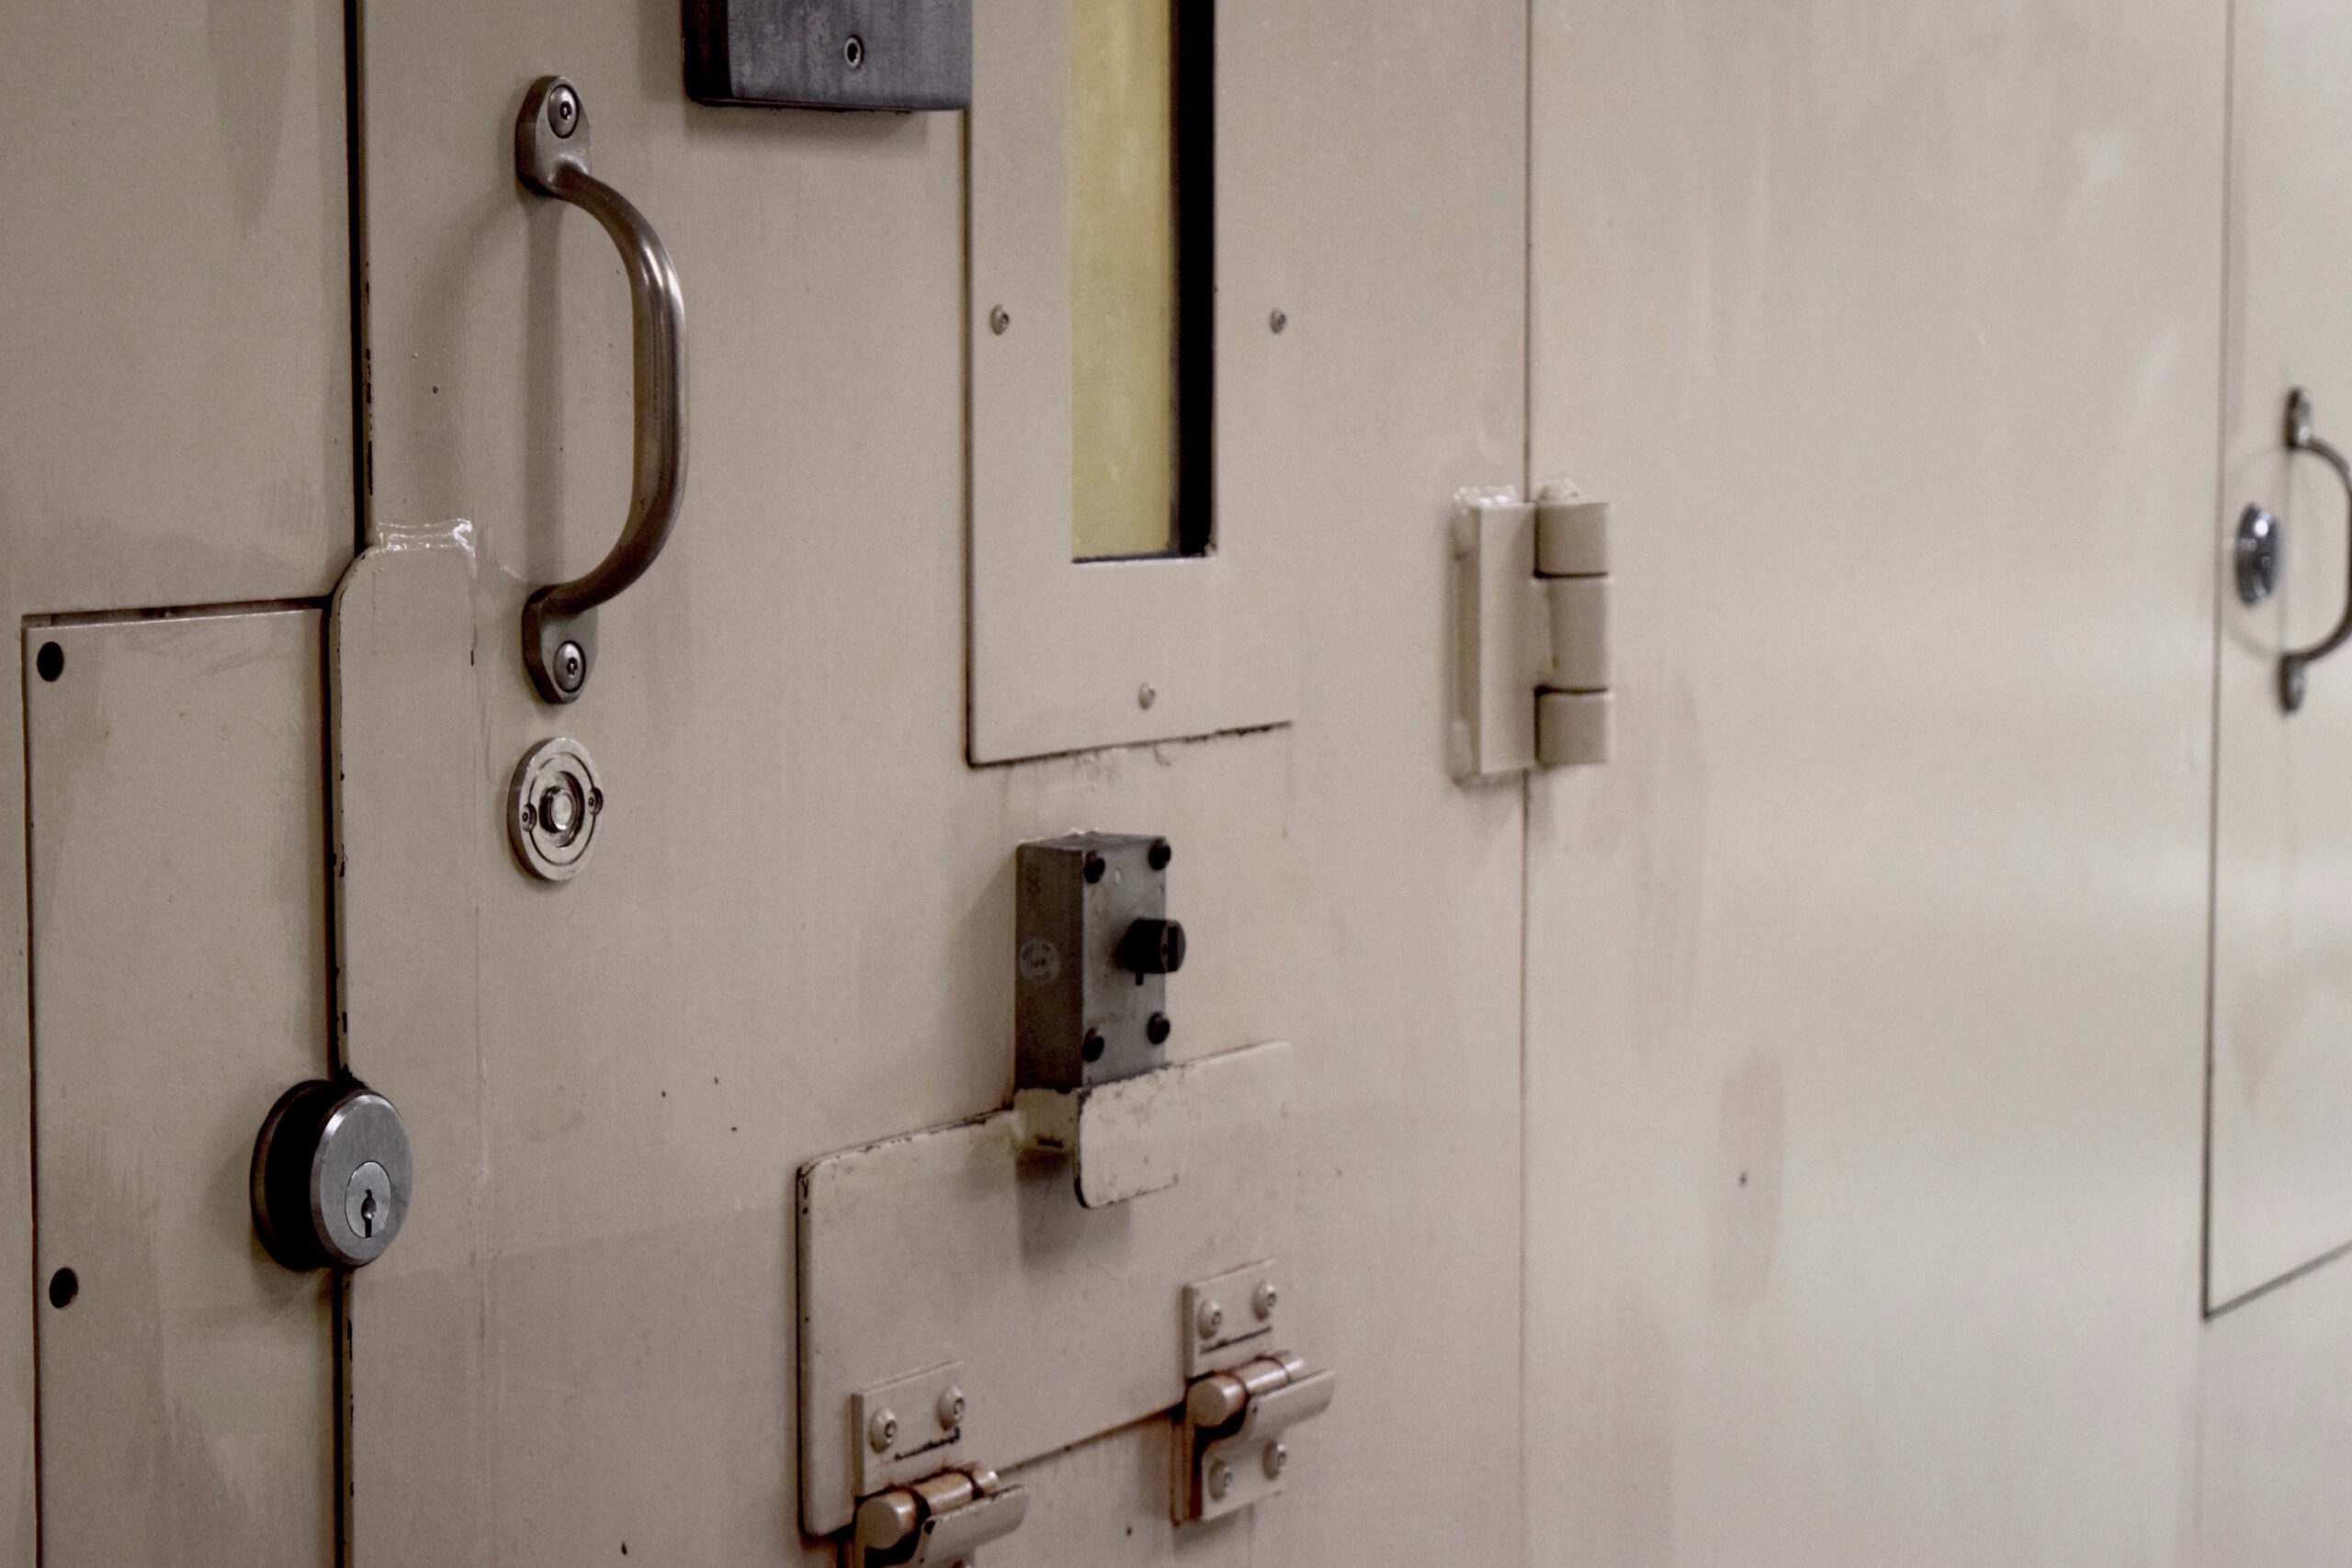 A cell door in the Dane County Jail